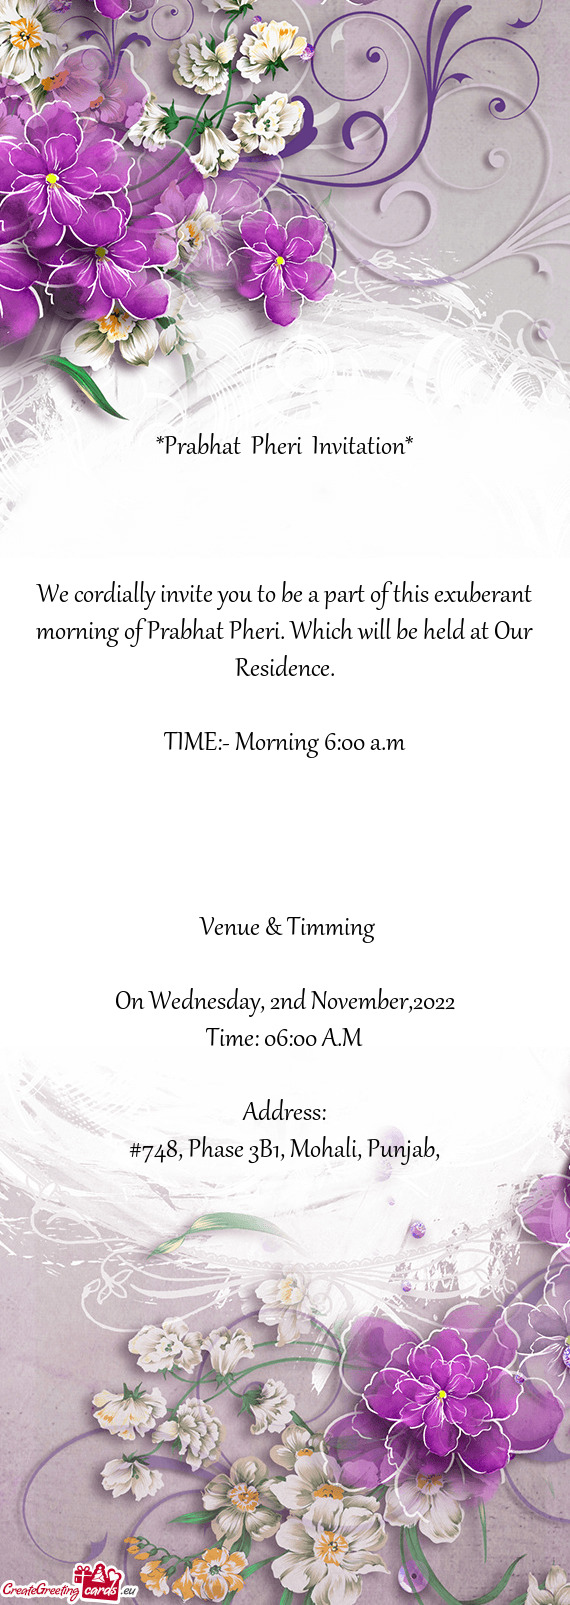 We cordially invite you to be a part of this exuberant morning of Prabhat Pheri. Which will be held